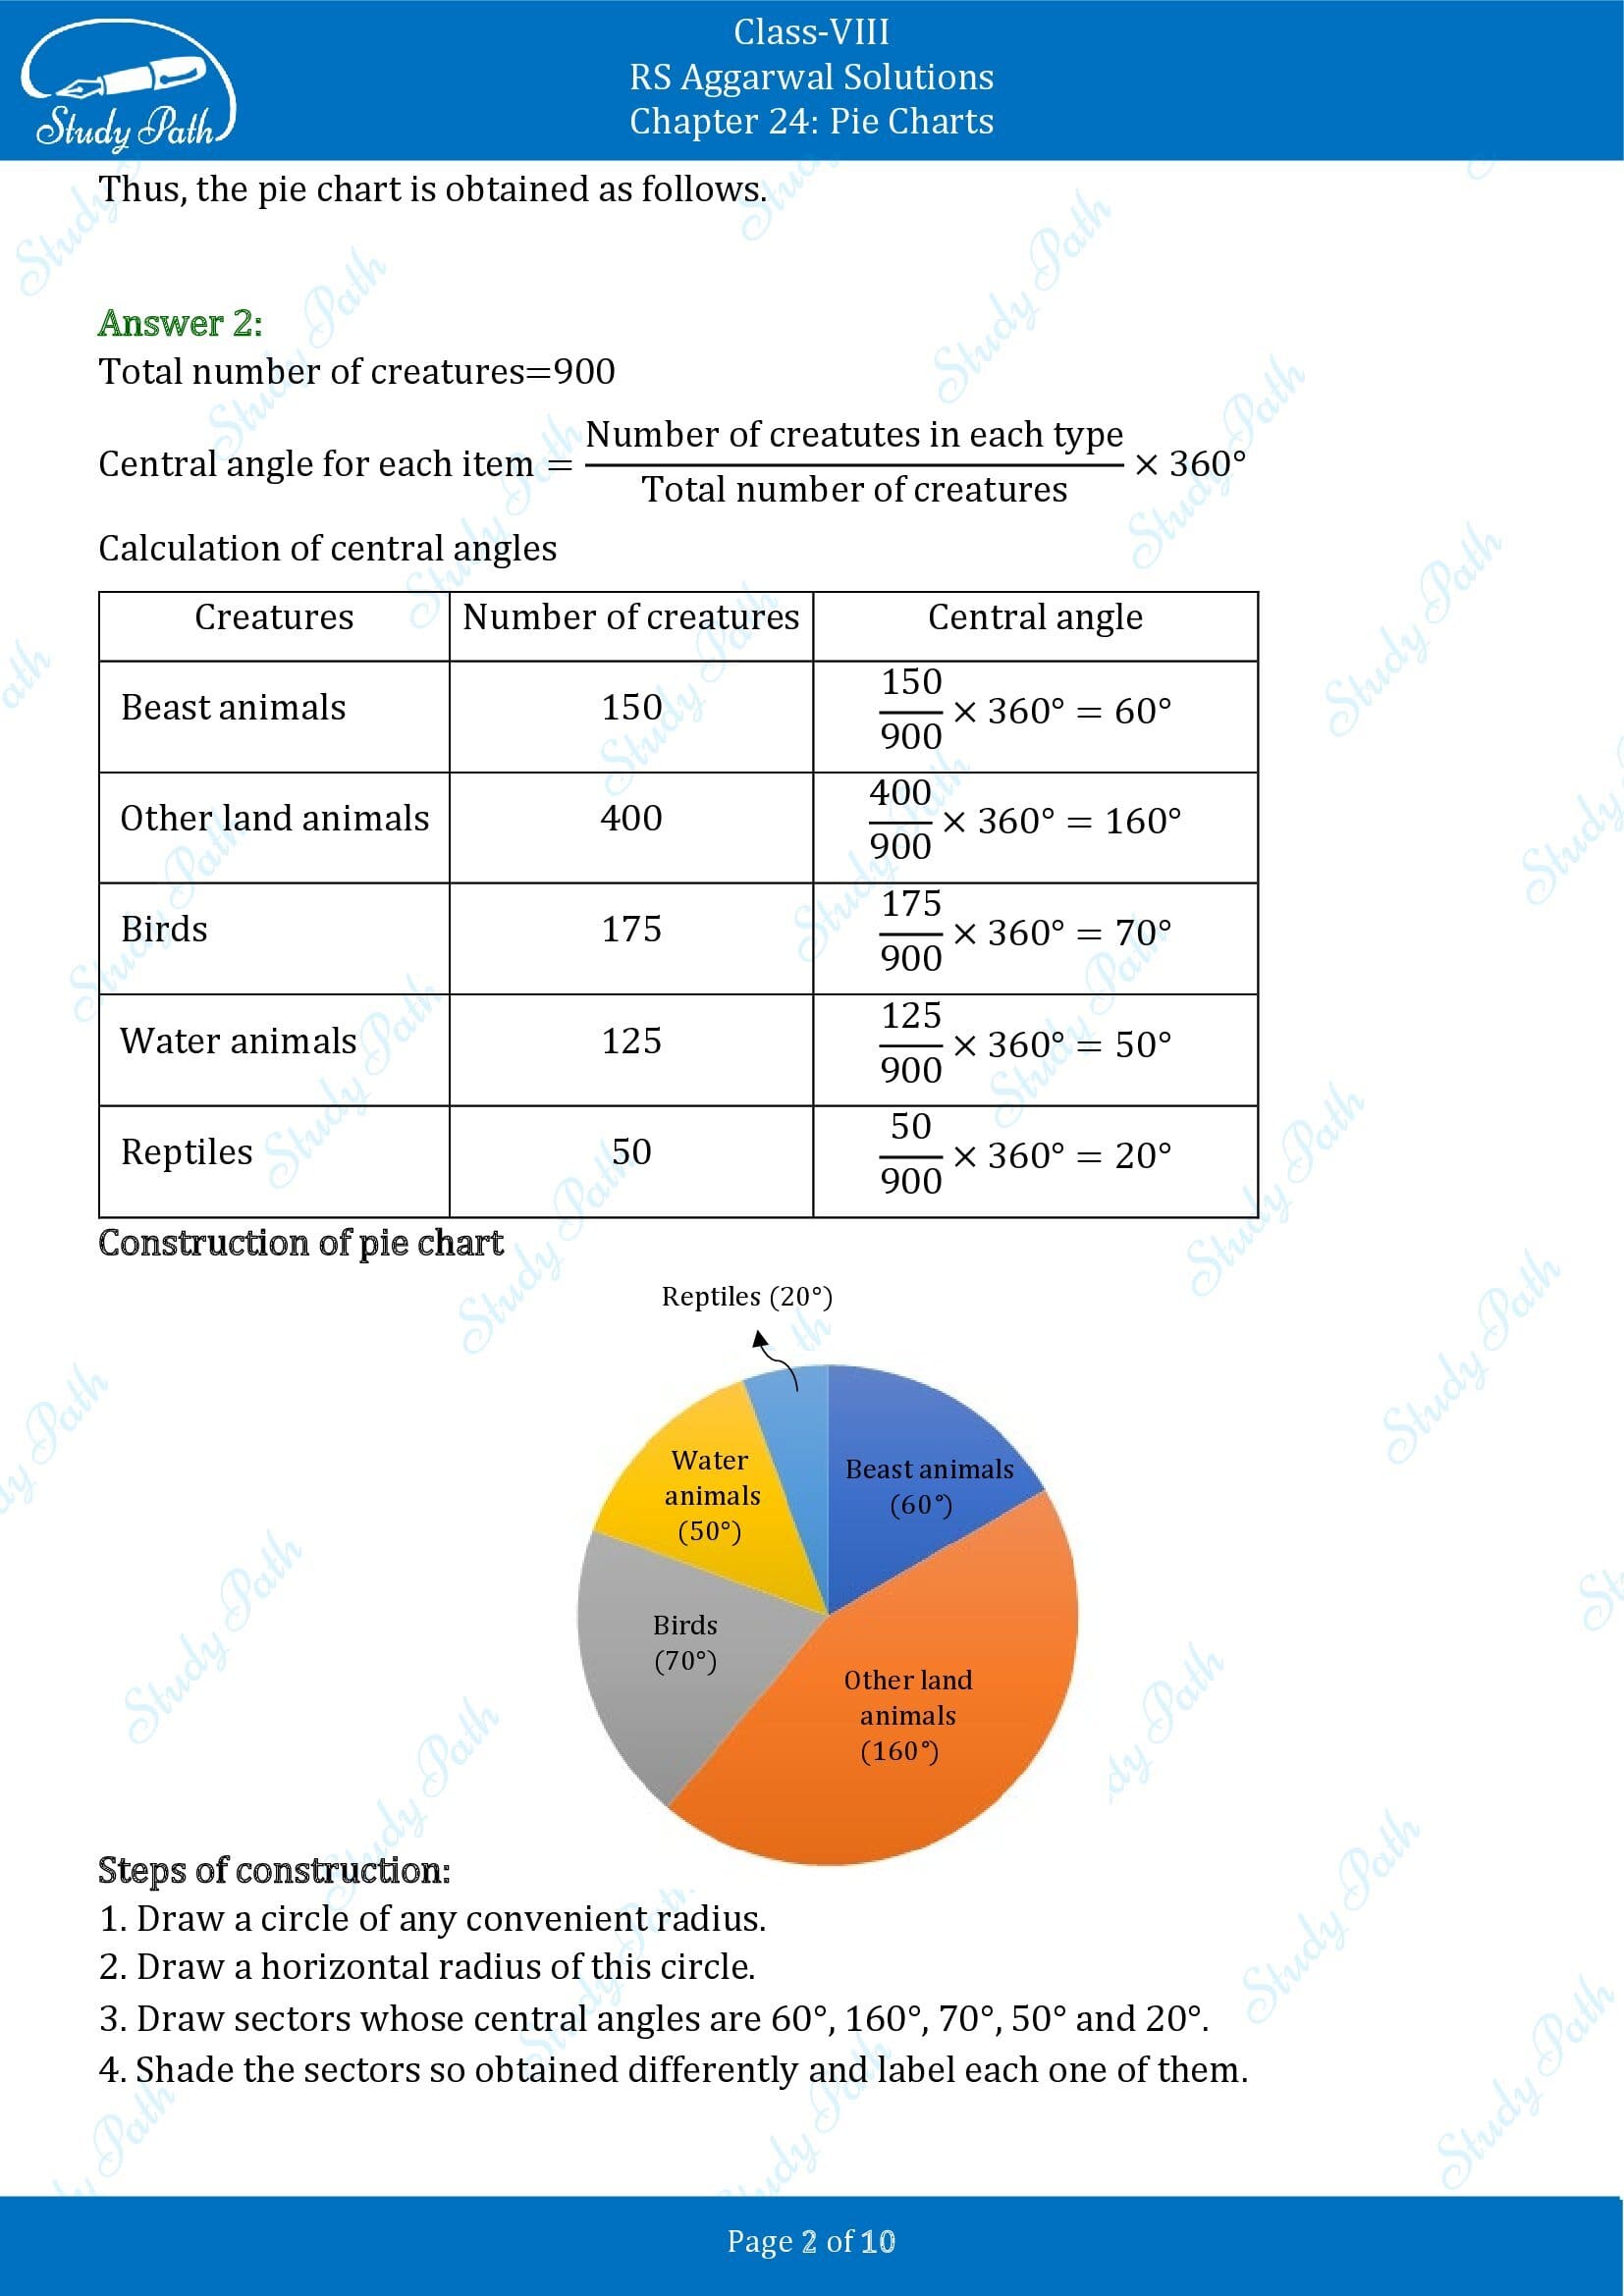 RS Aggarwal Solutions Class 8 Chapter 24 Pie Charts Exercise 24A 00002